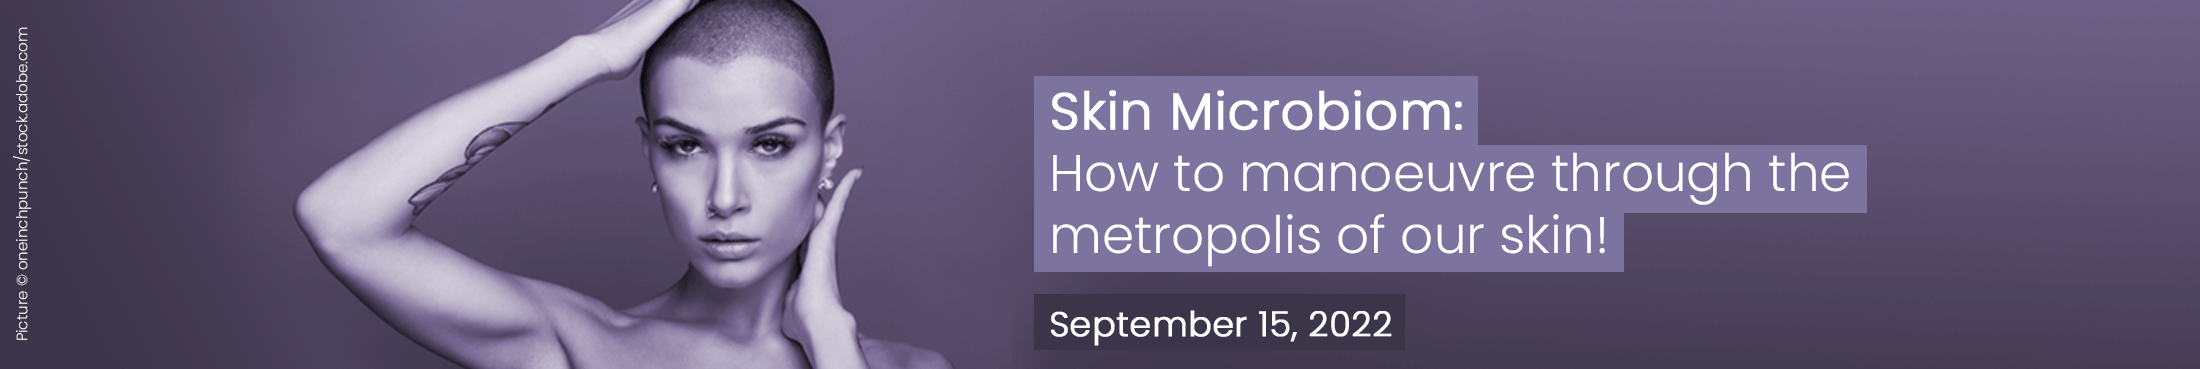 Personal Care | Skin Microbiome: How to manoeuvre through the metropolis of our skin!